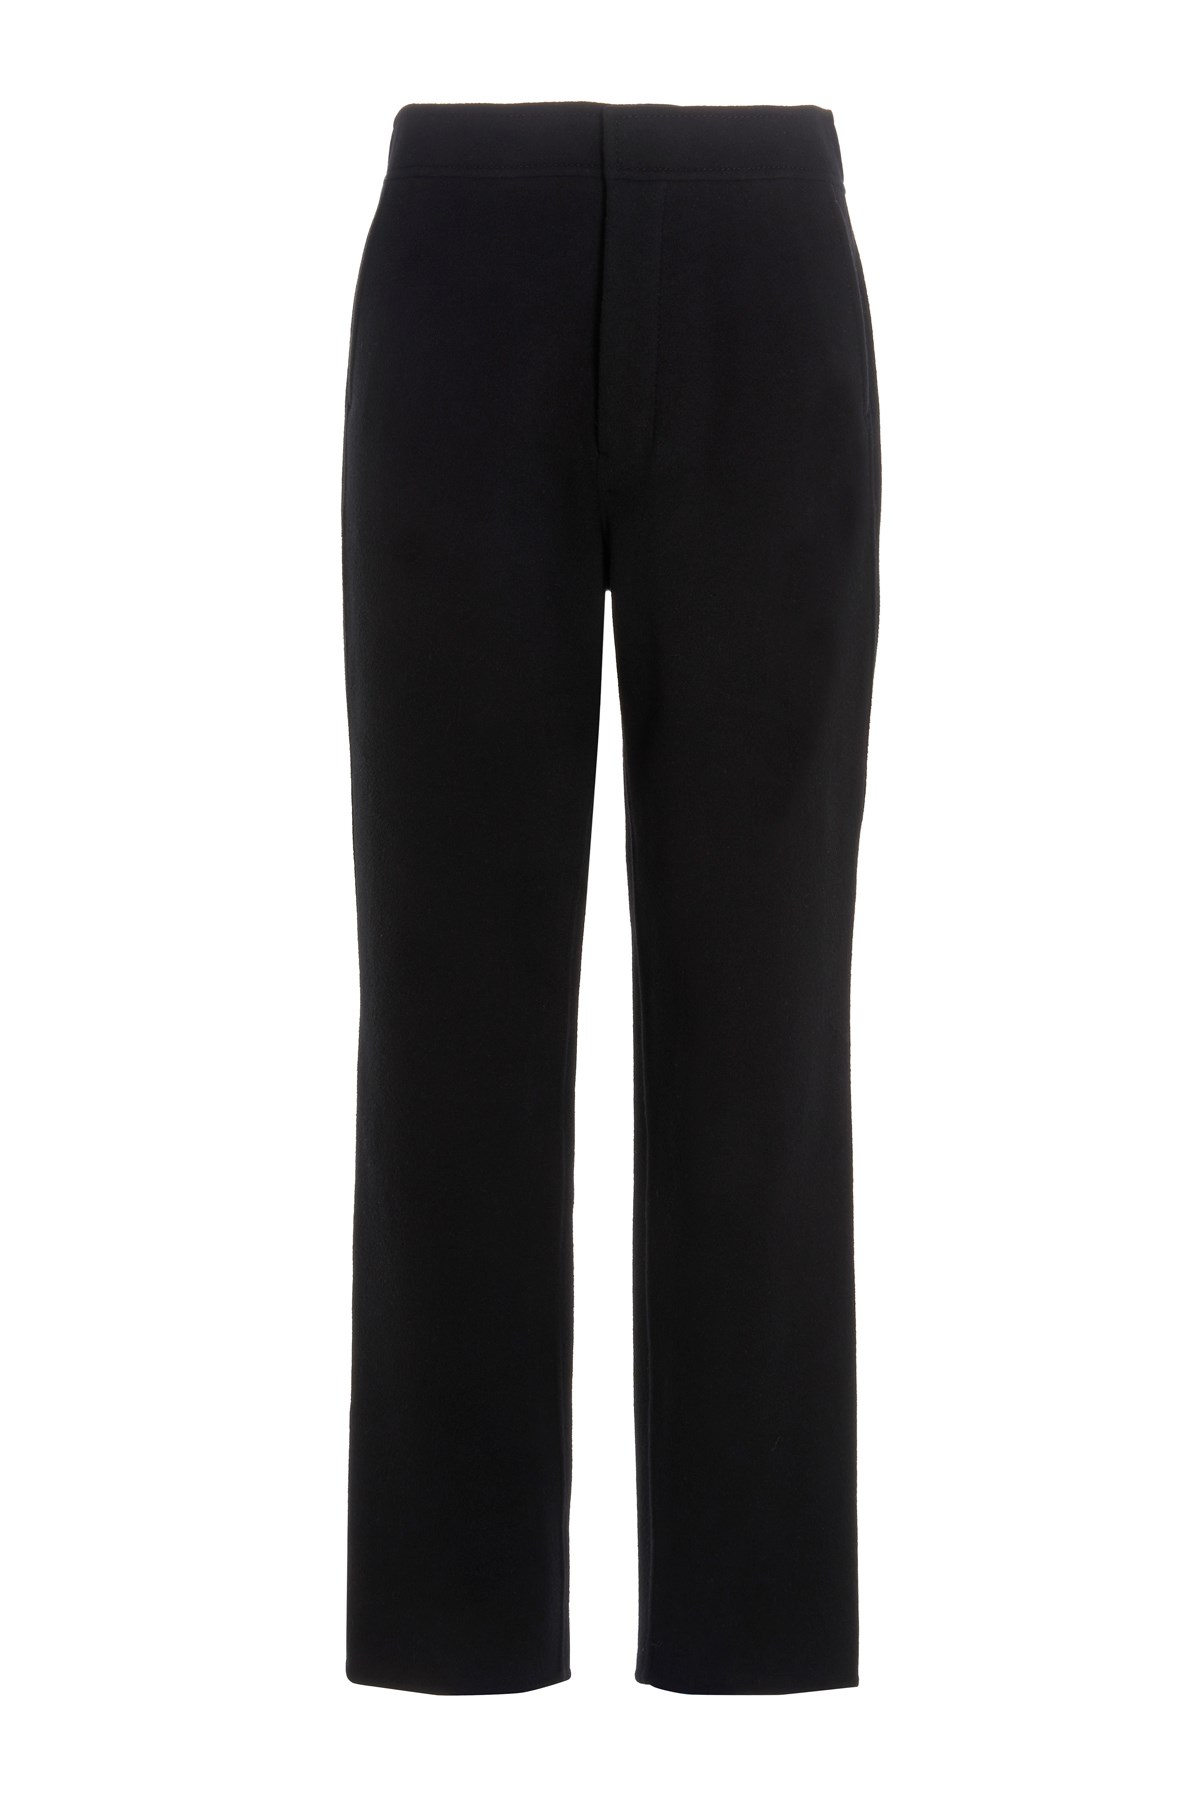 AMI PARIS Wool And Cashmere Trousers